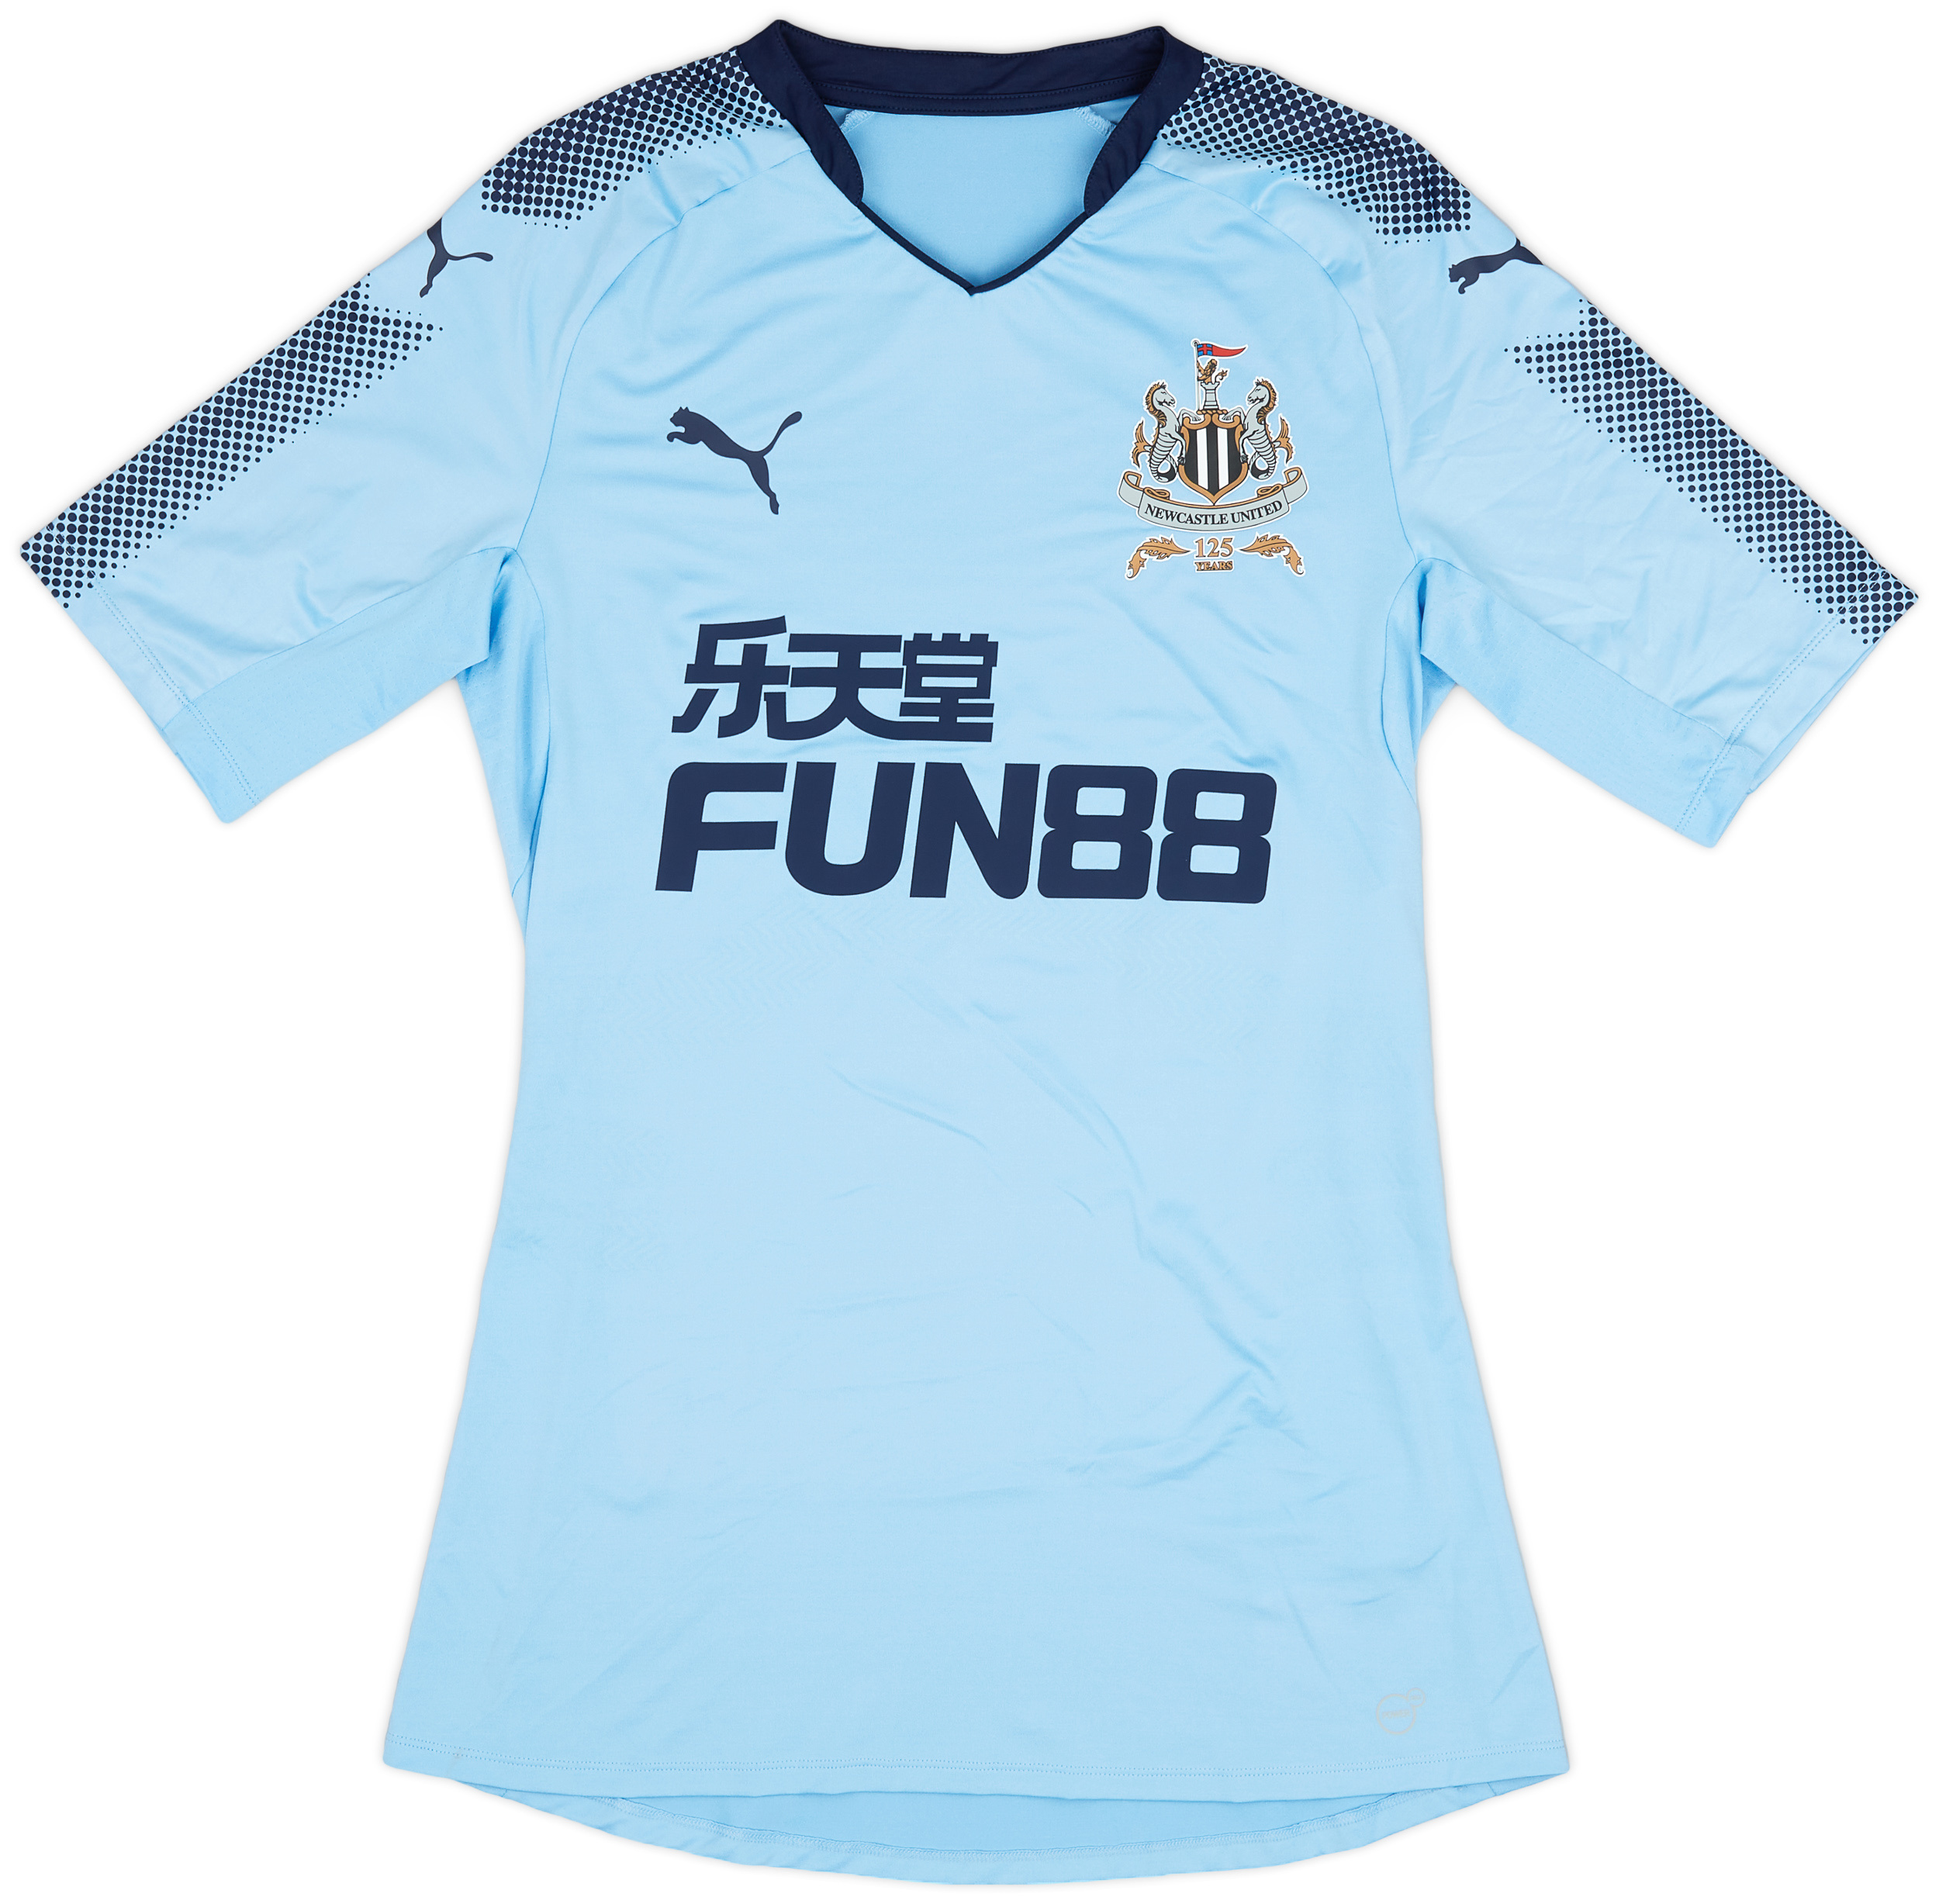 2017-18 Newcastle United Player Issue Away Shirt - 7/10 - ()